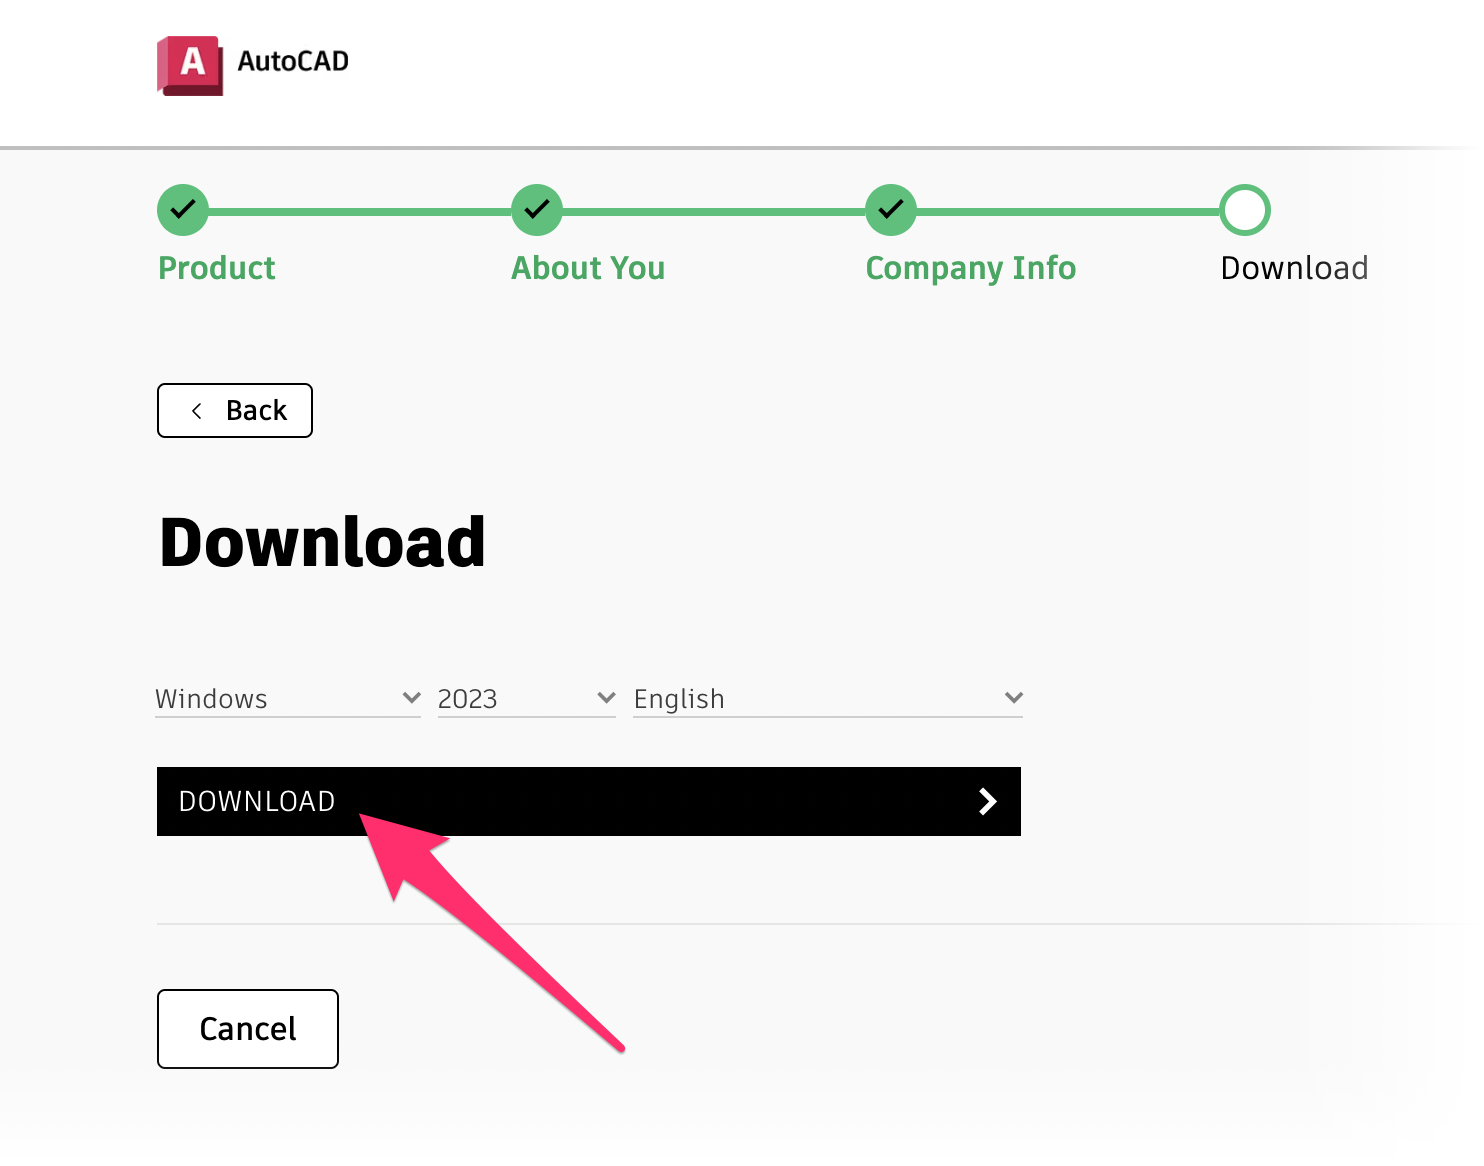 Download button for downloading an AutoCAD trial